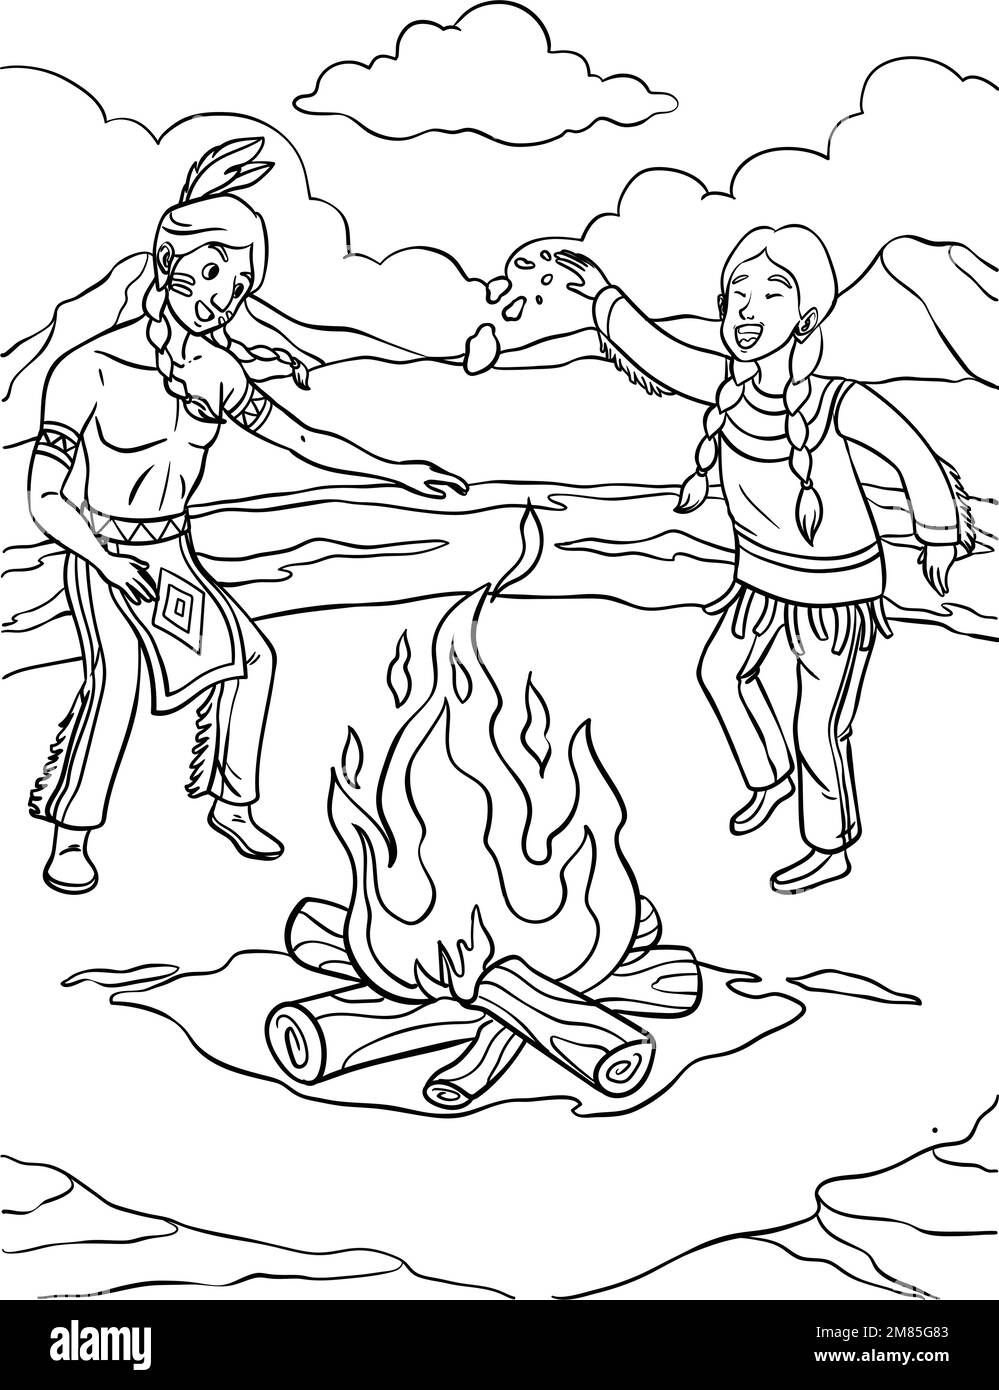 Native American Indian Fire Dancing Coloring Page  Stock Vector